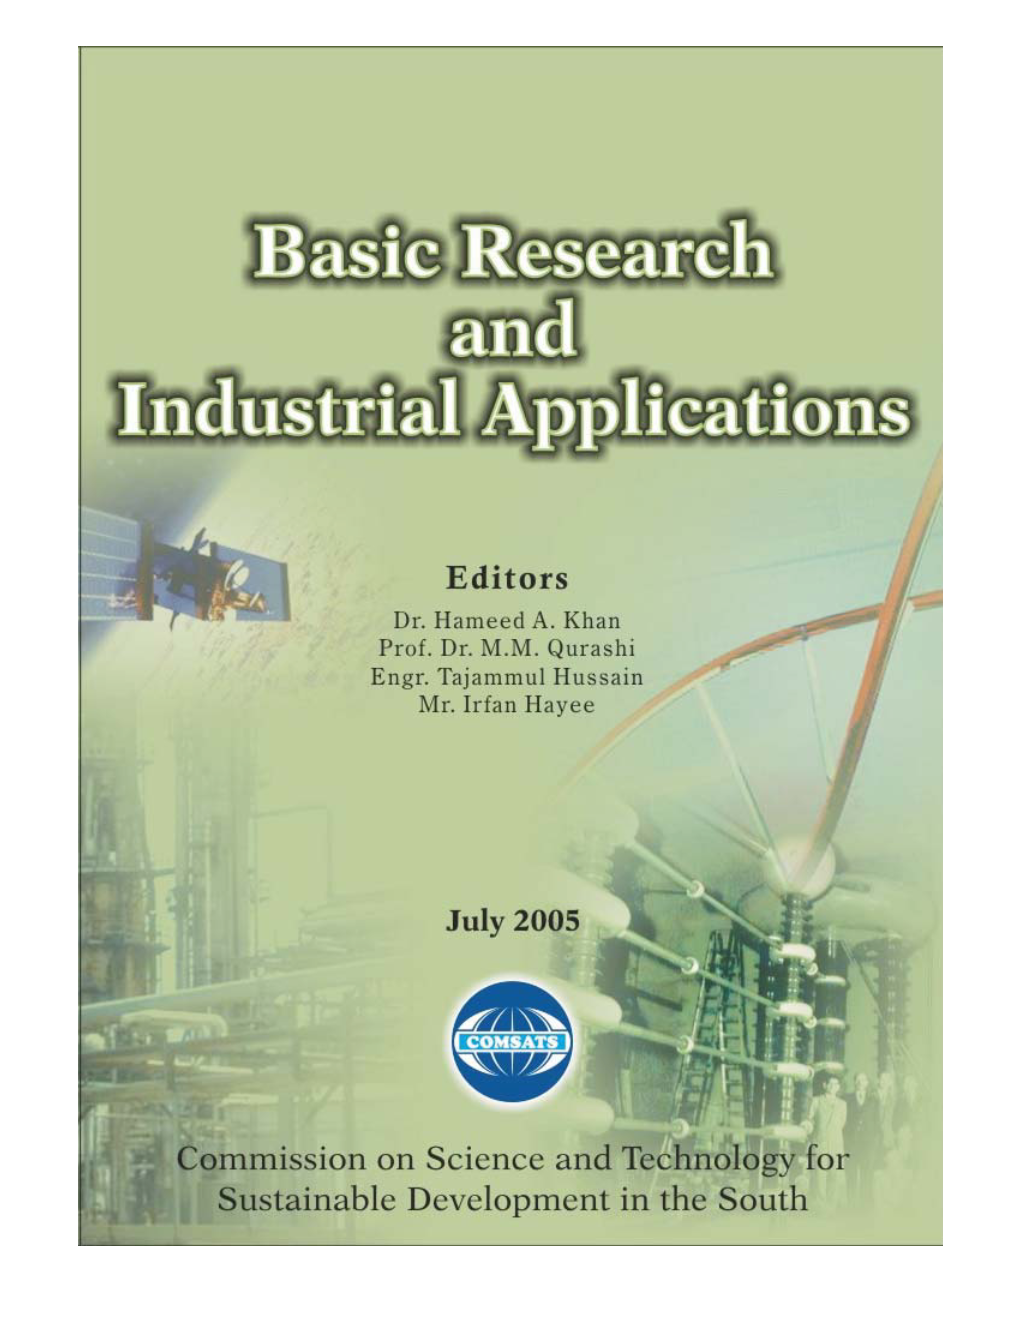 Basic Research and Industrial Applications